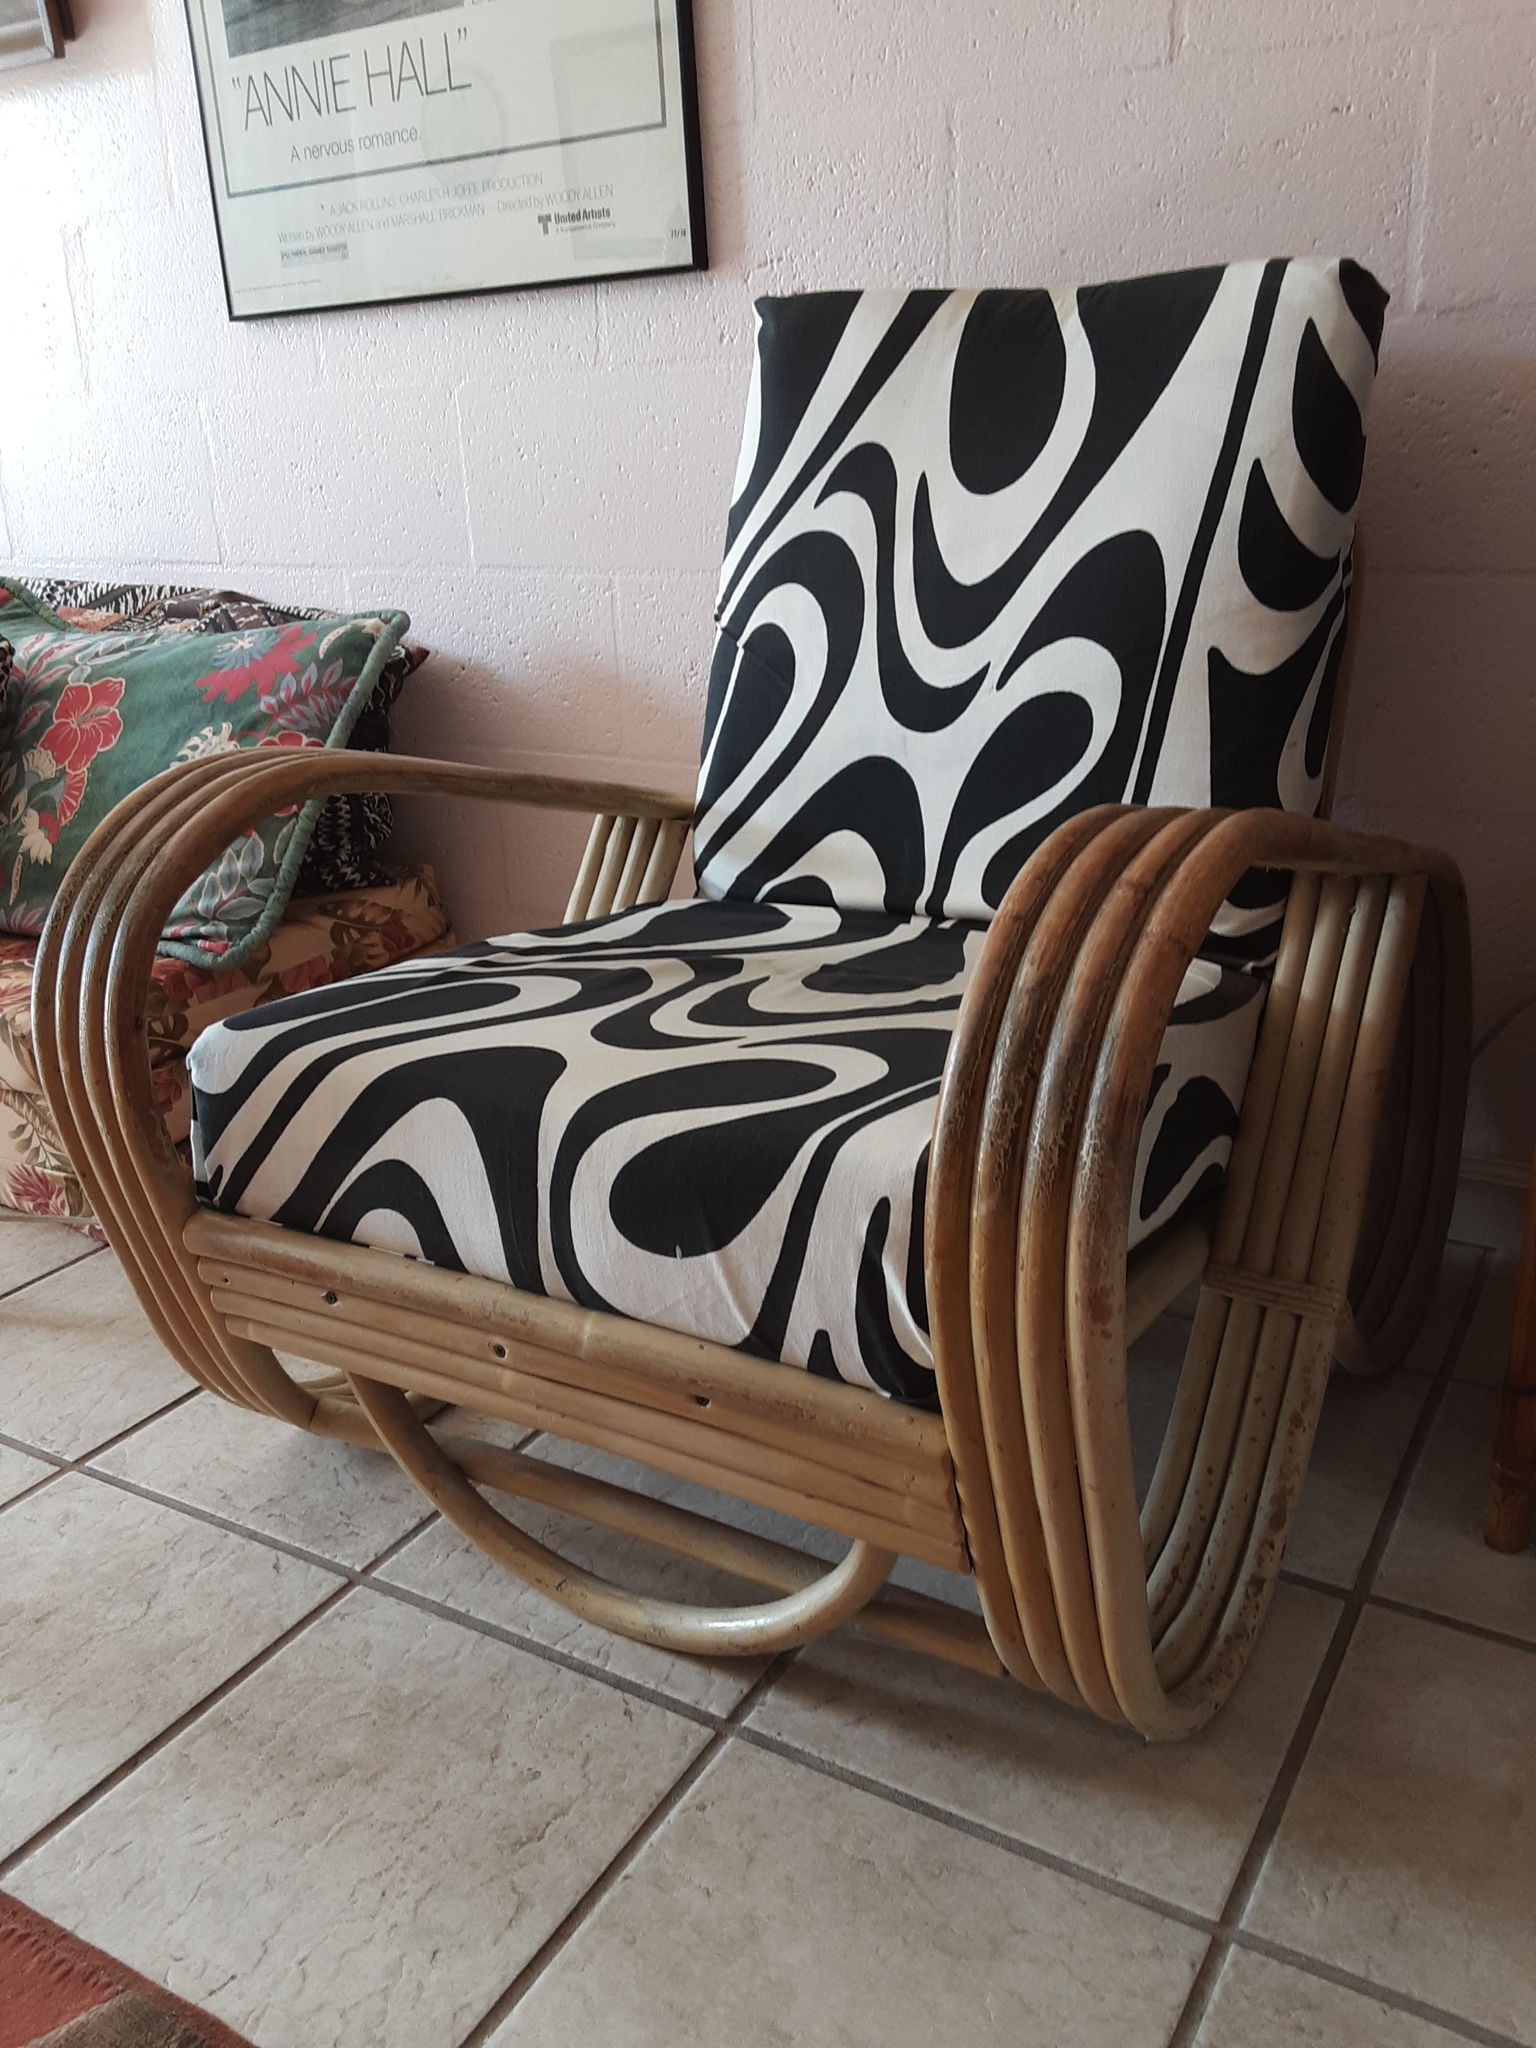 Vintage rattan lounge chair for listening